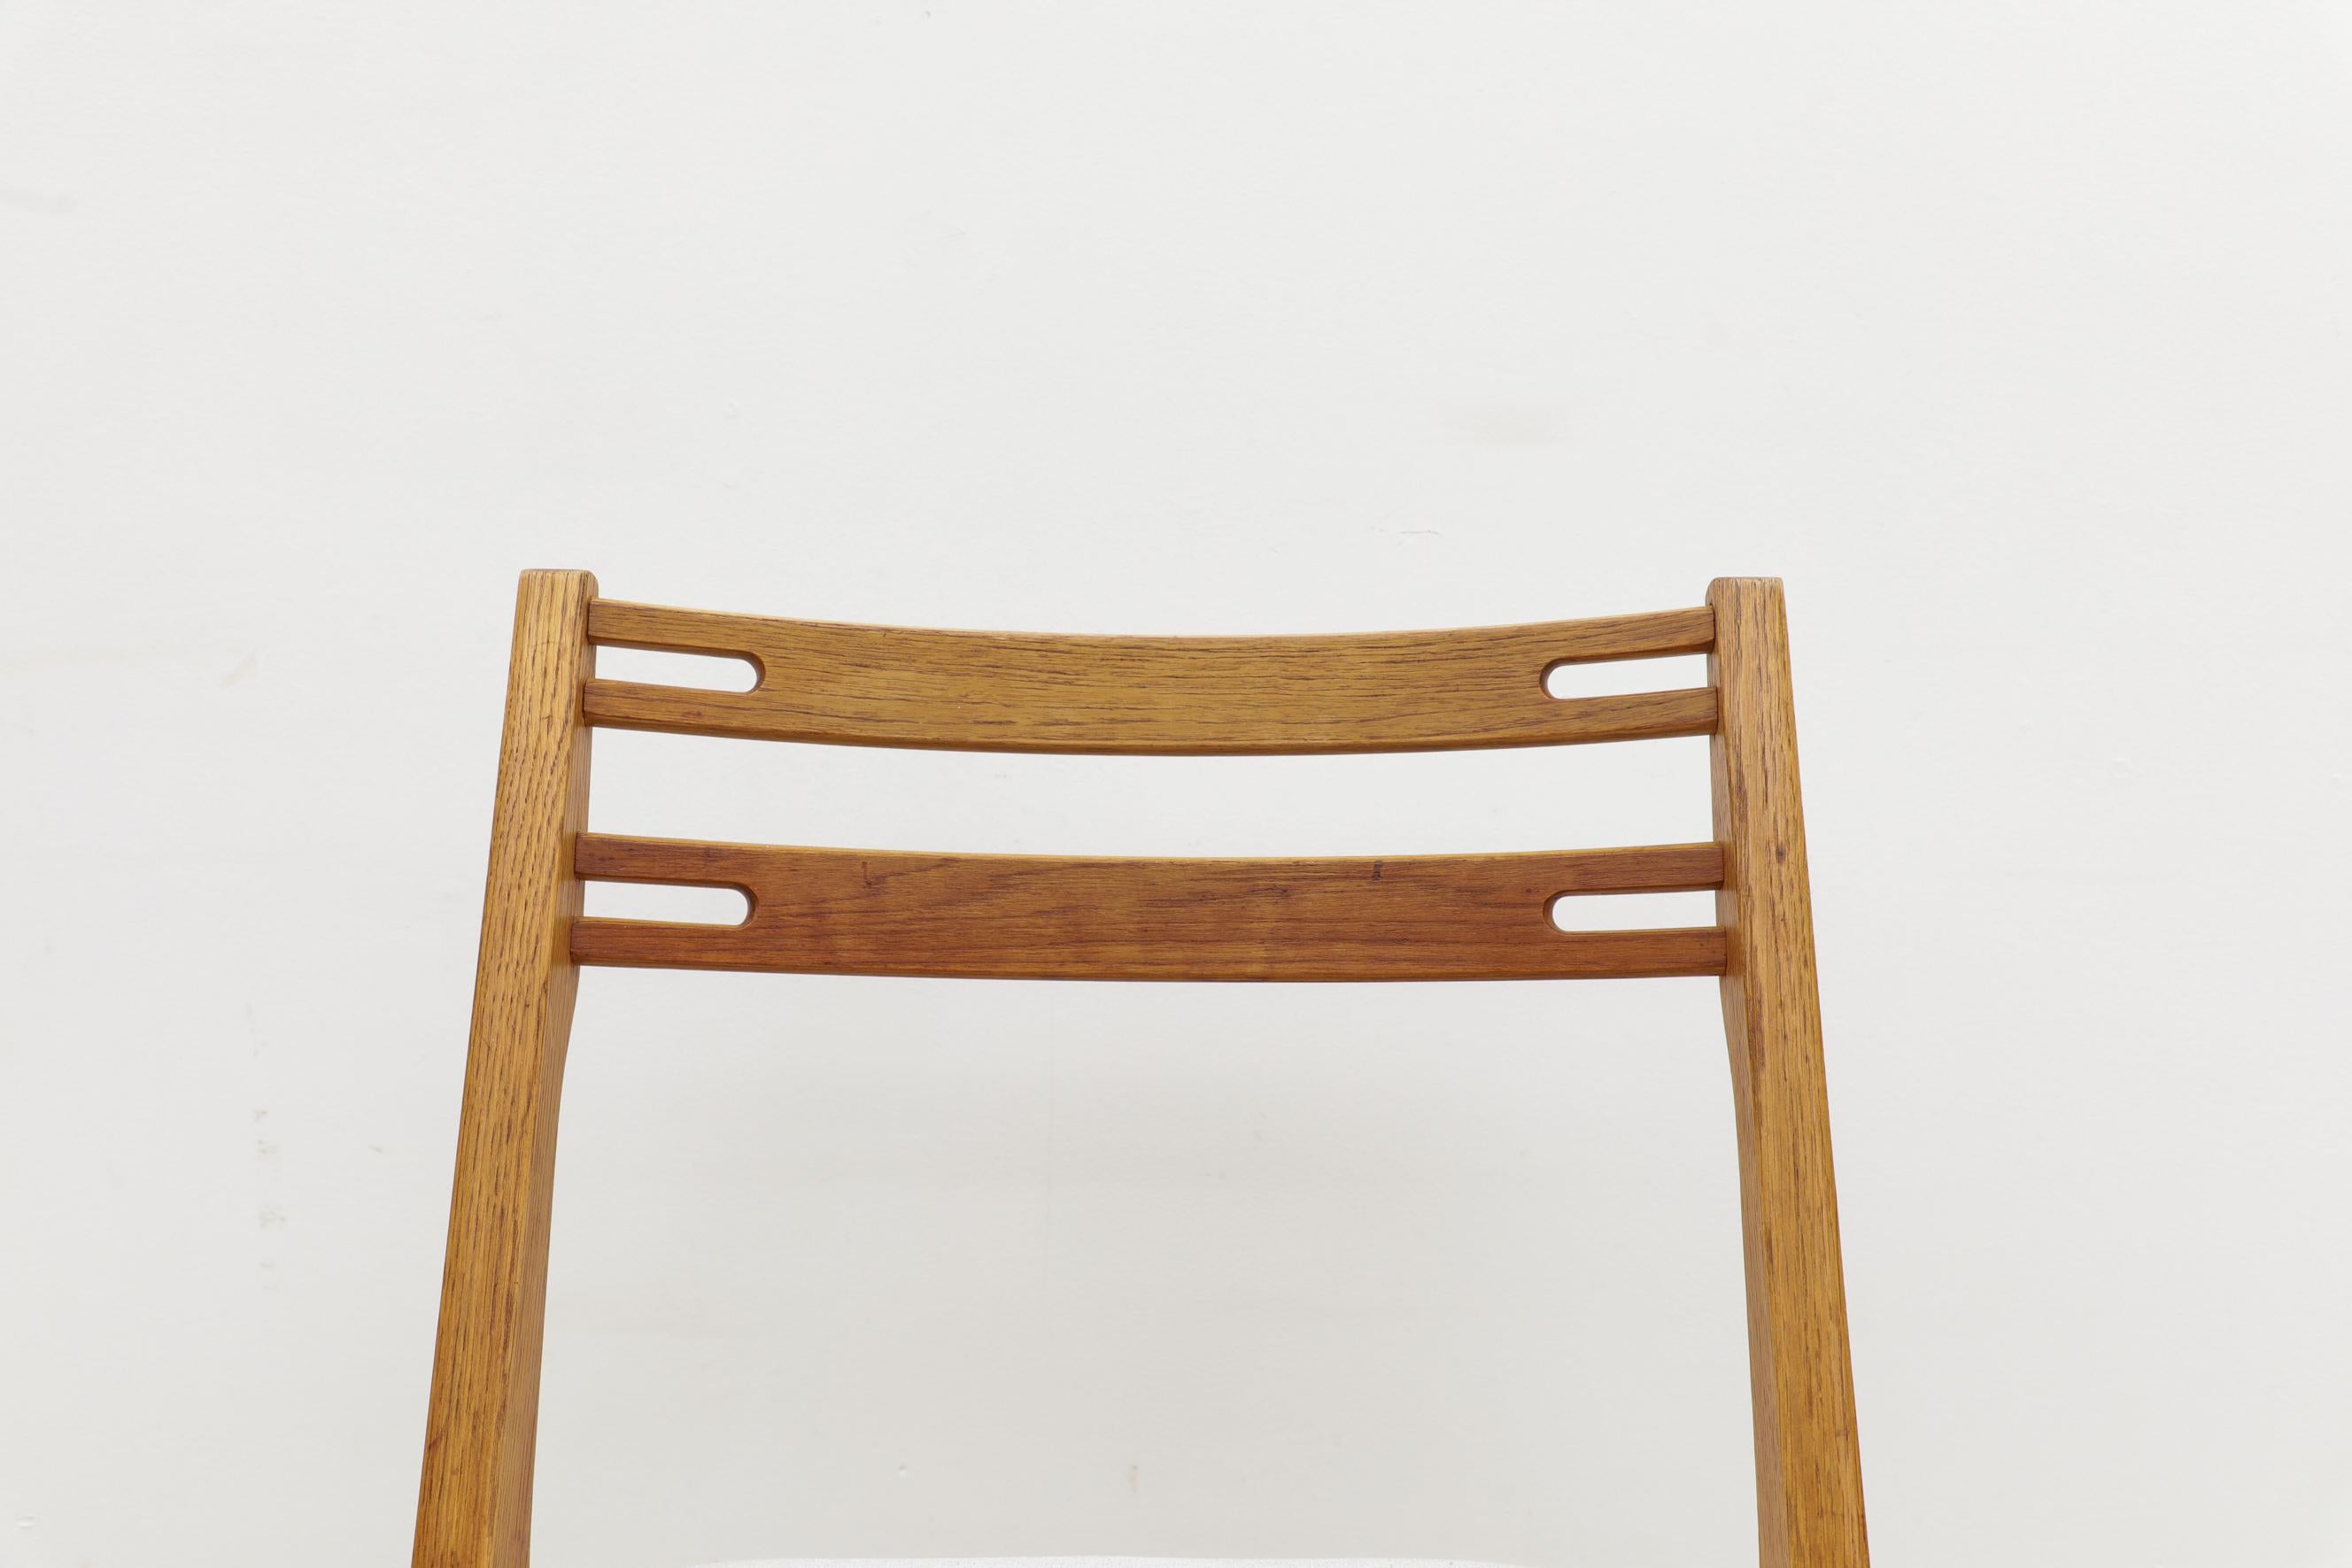 Single Hans Wegner Inspired Oak Dining Chair with Compass Legs and Bowed Back For Sale 2